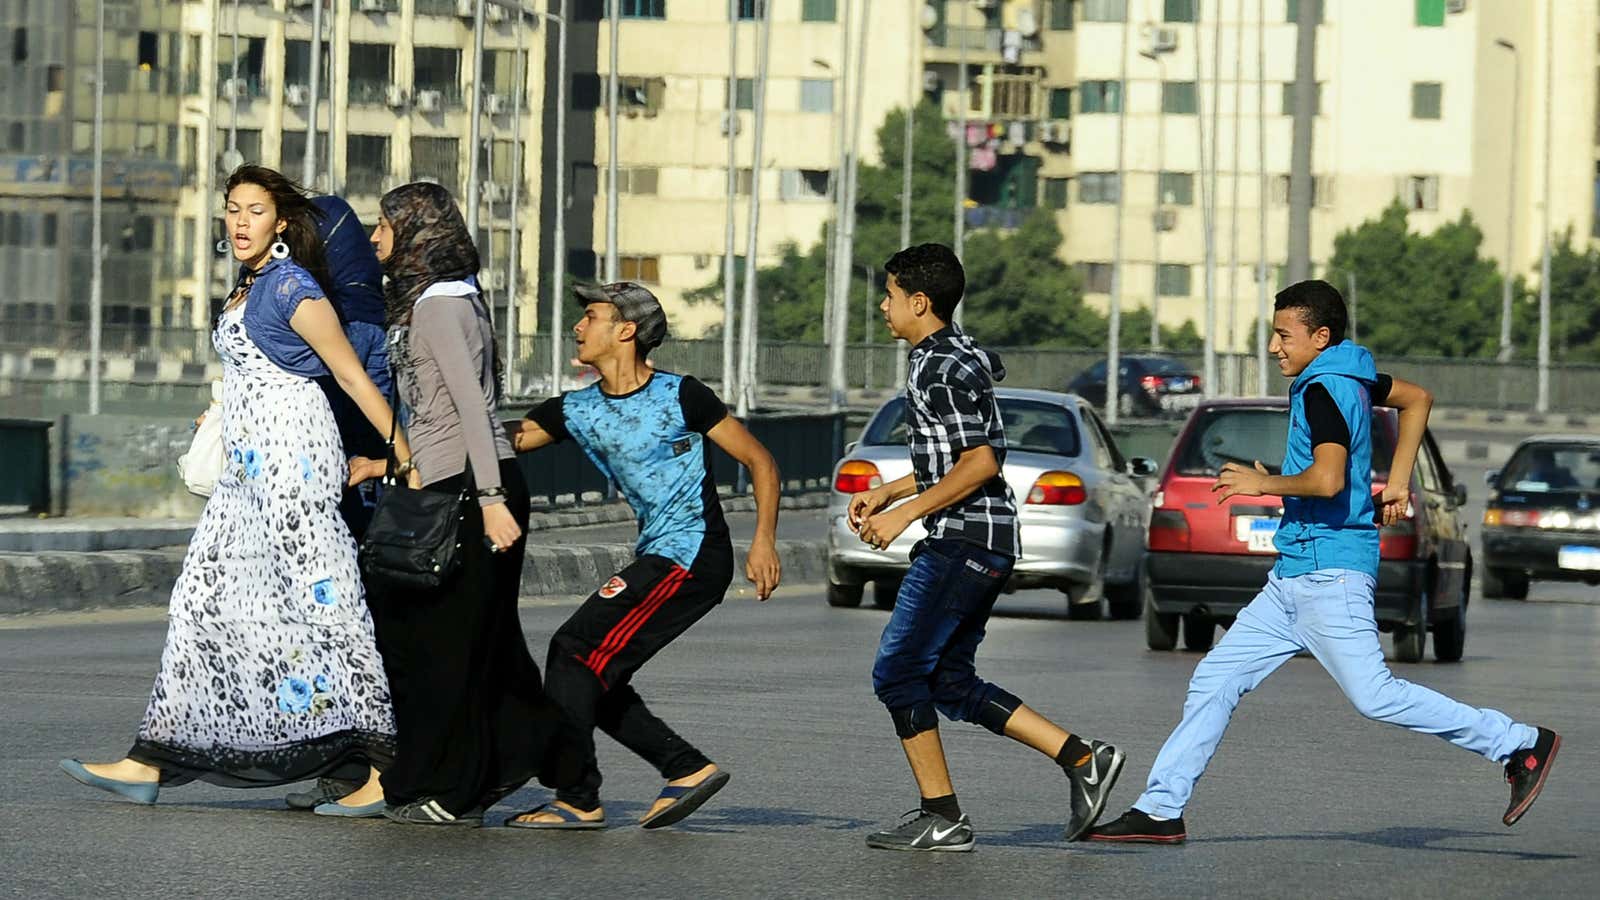 A mob of Egyptian youth grope a woman in Cairo